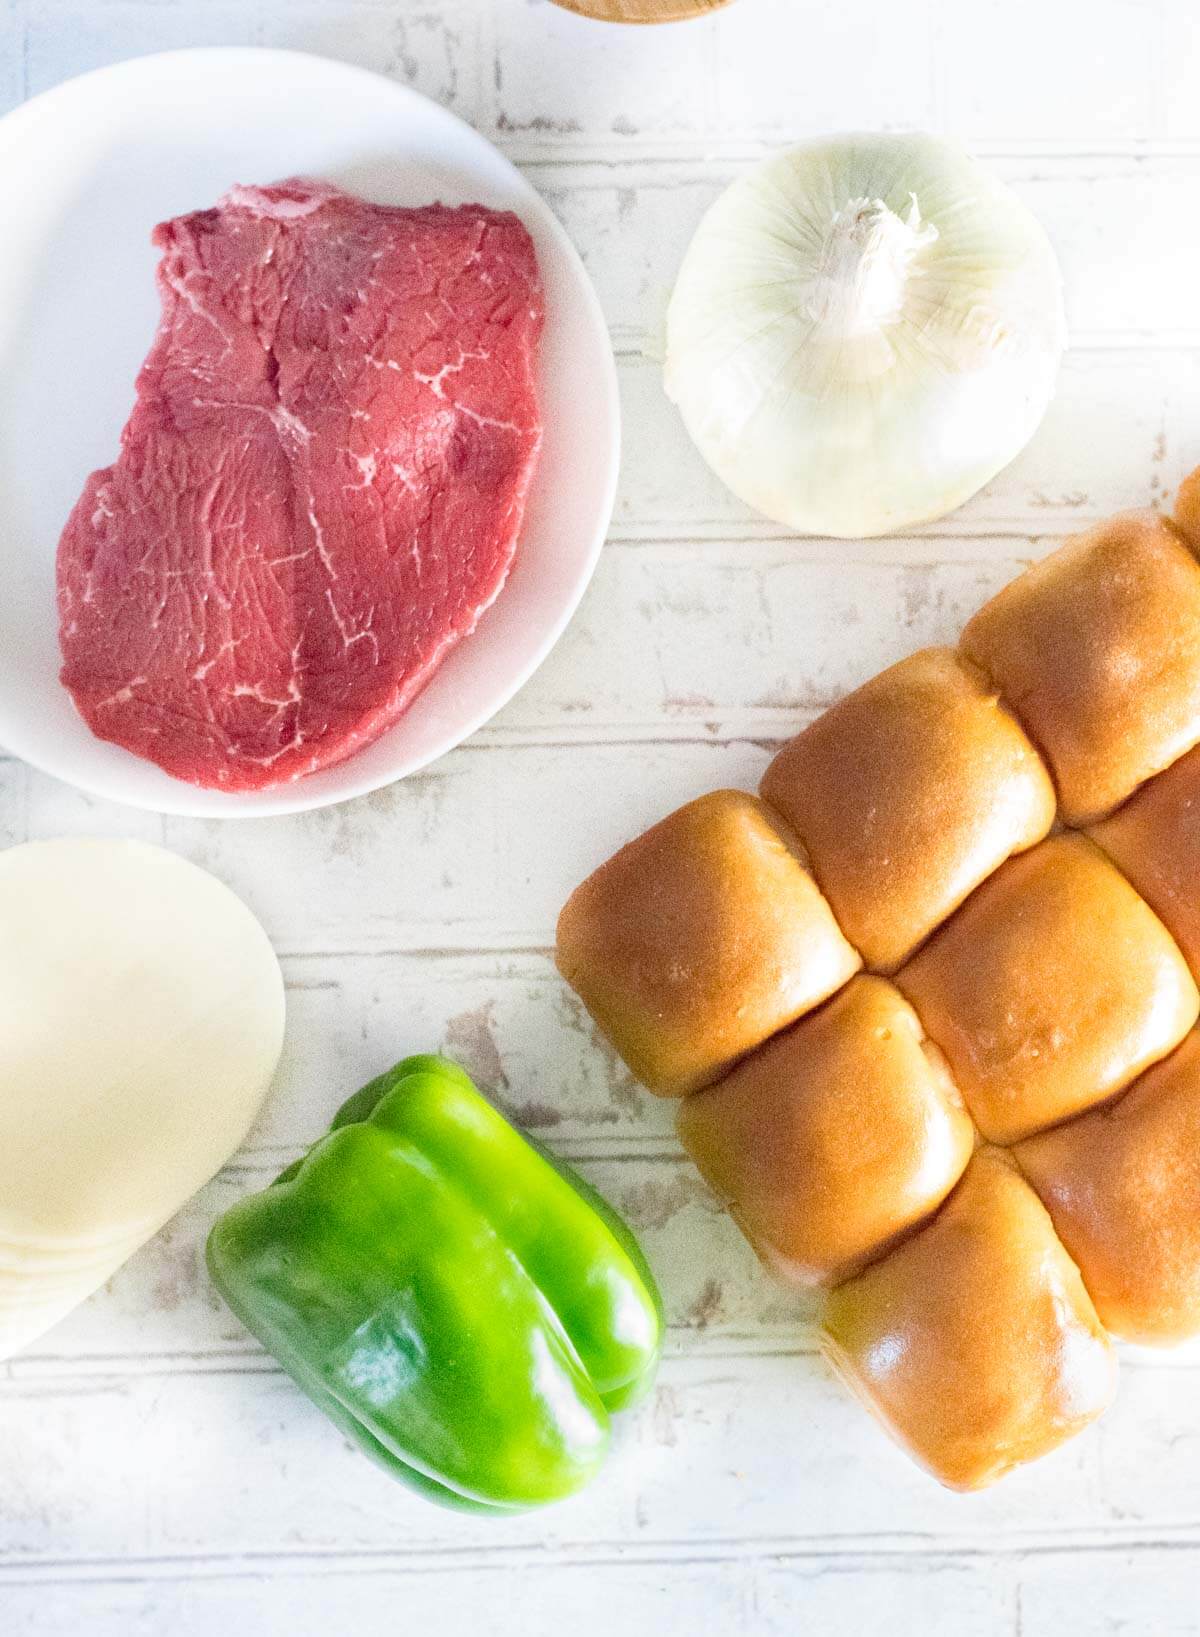 Ingredients shown are sirloin, onion, Provolone, pepper, and buns.